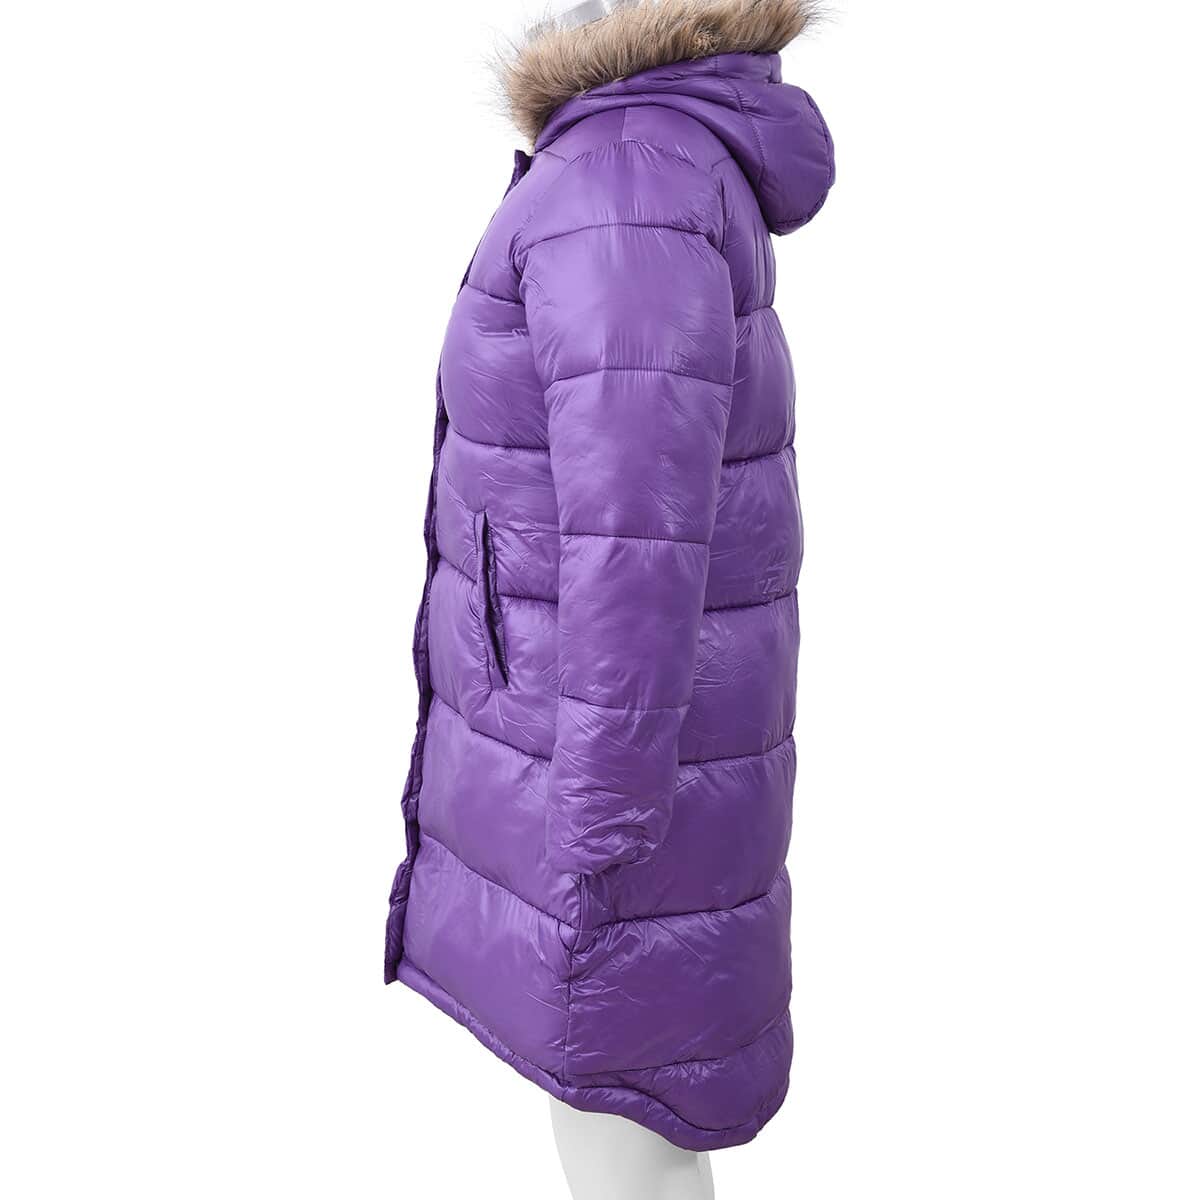 Purple Women's Puffer Jacket with Faux Fur Hood and Pockets - L (Nylon/Polyester) image number 2